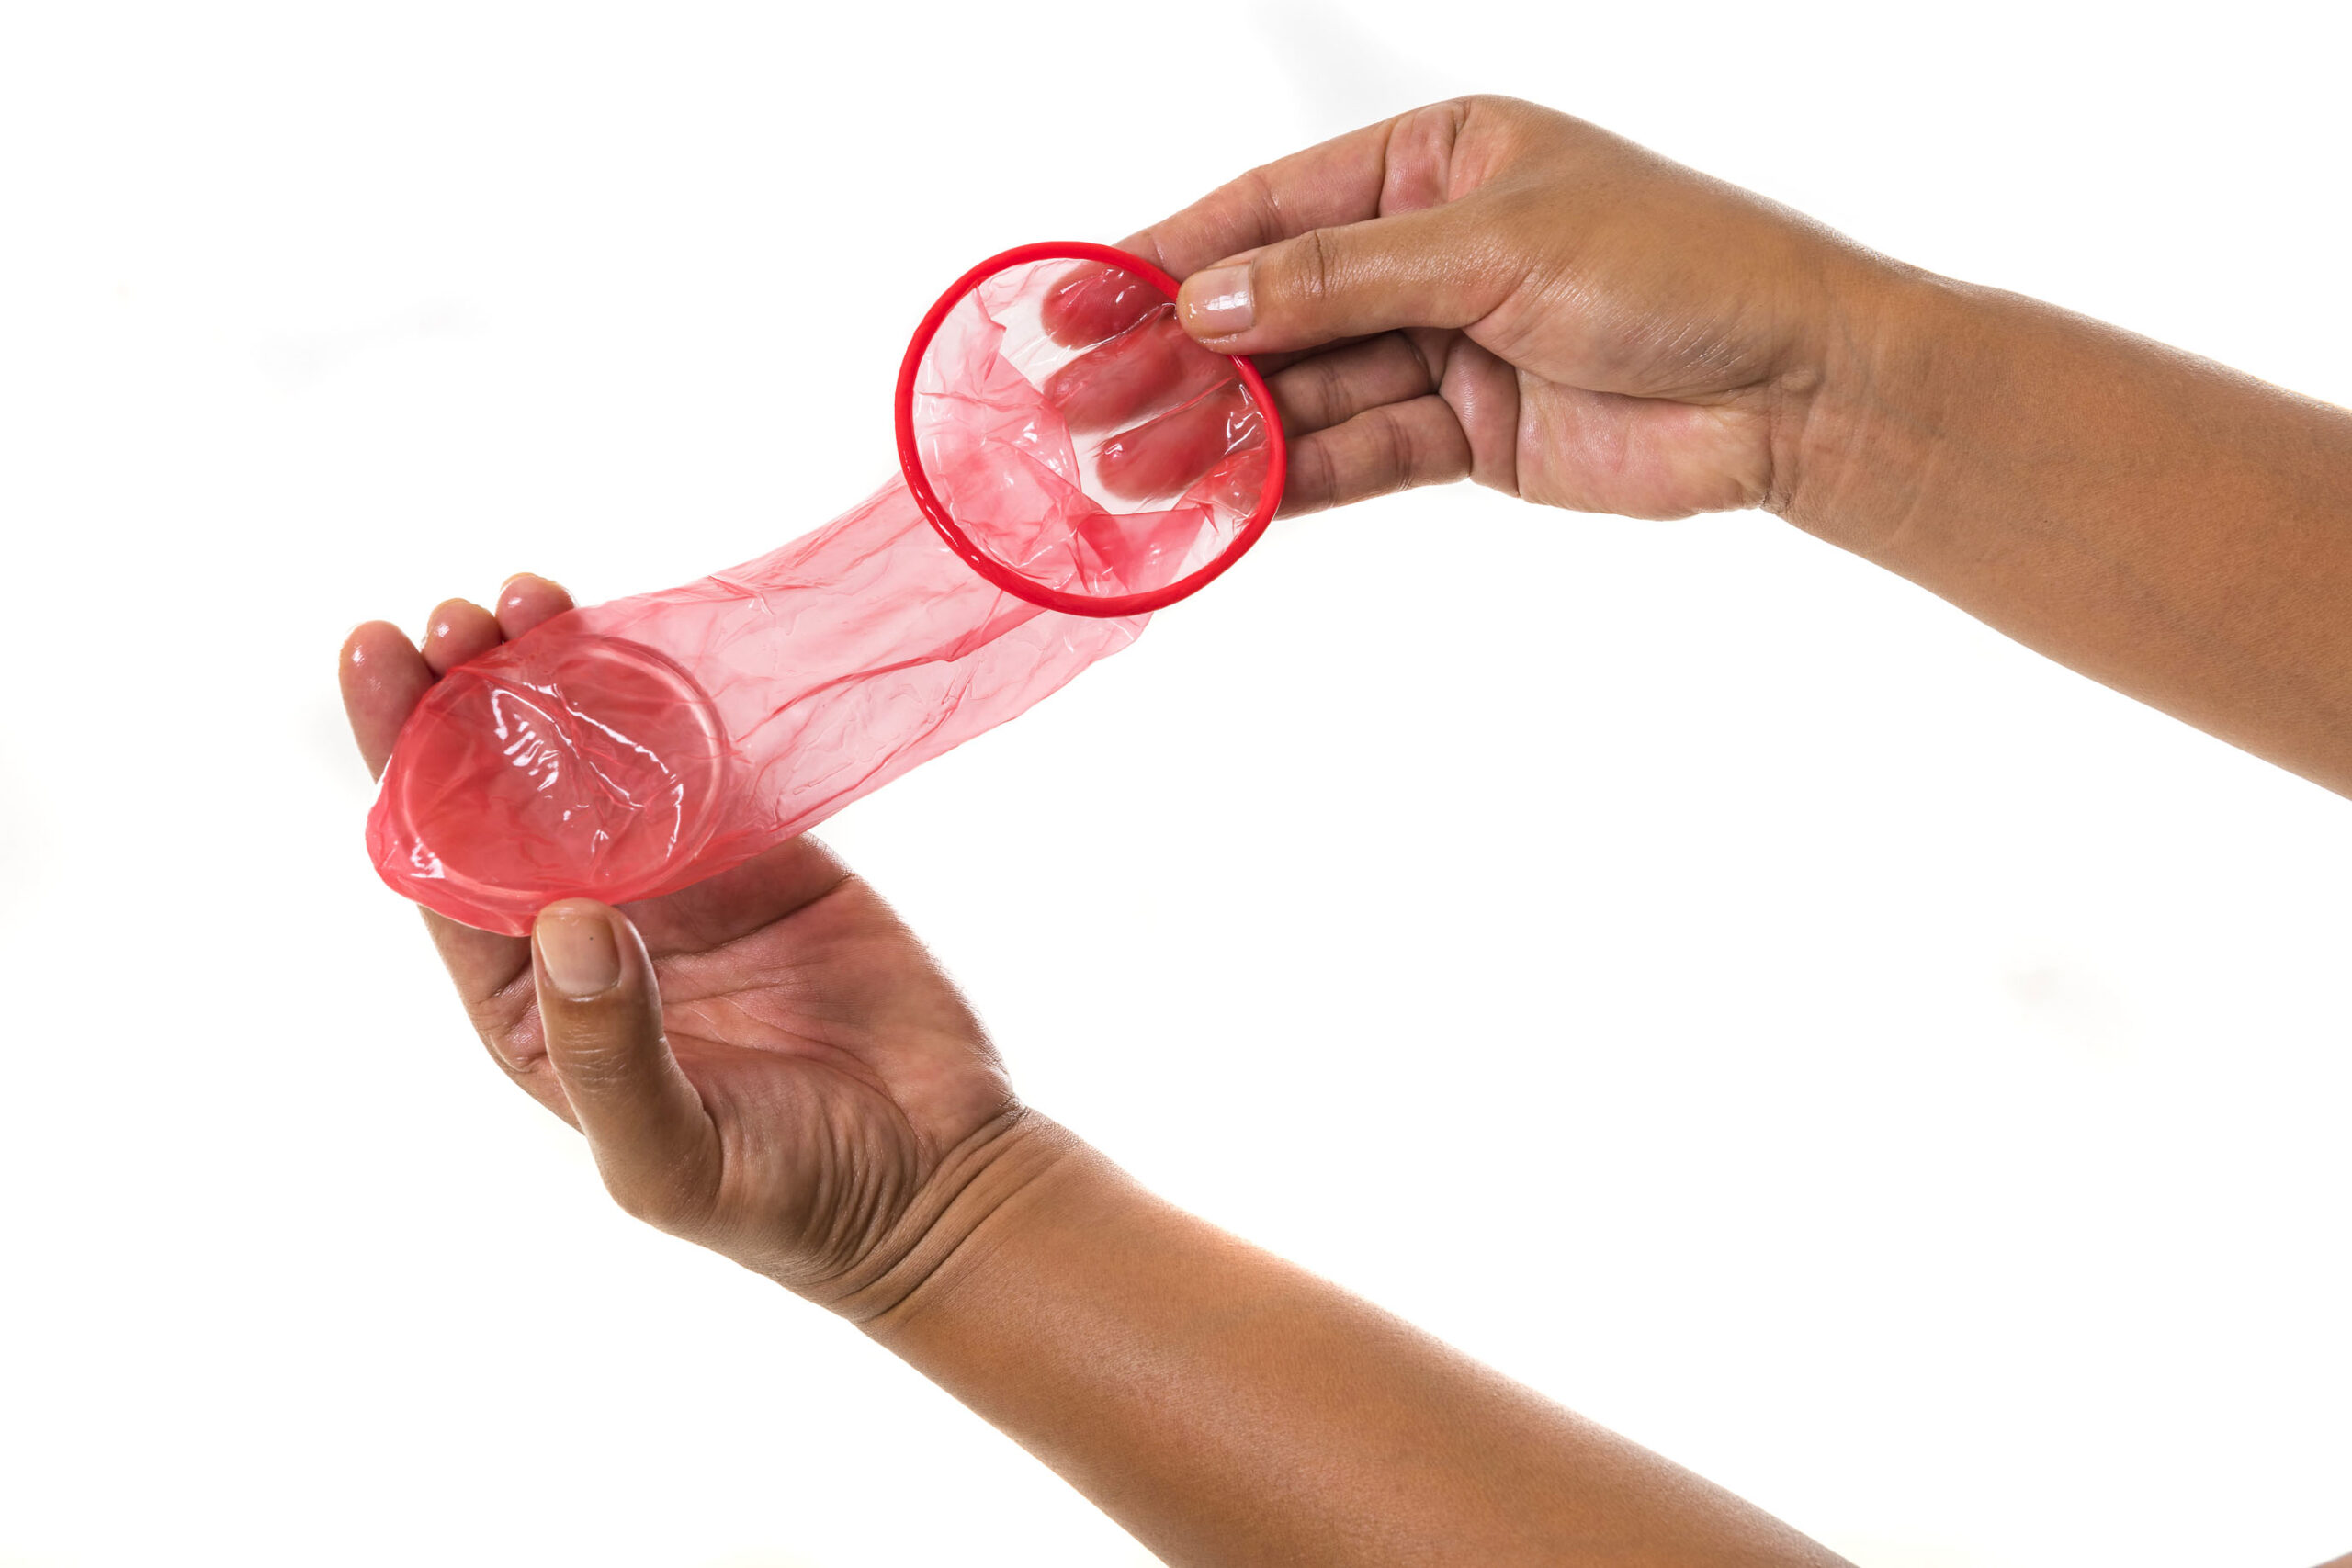 Find inner joy Why this condom can take your sexual pleasure to new heights